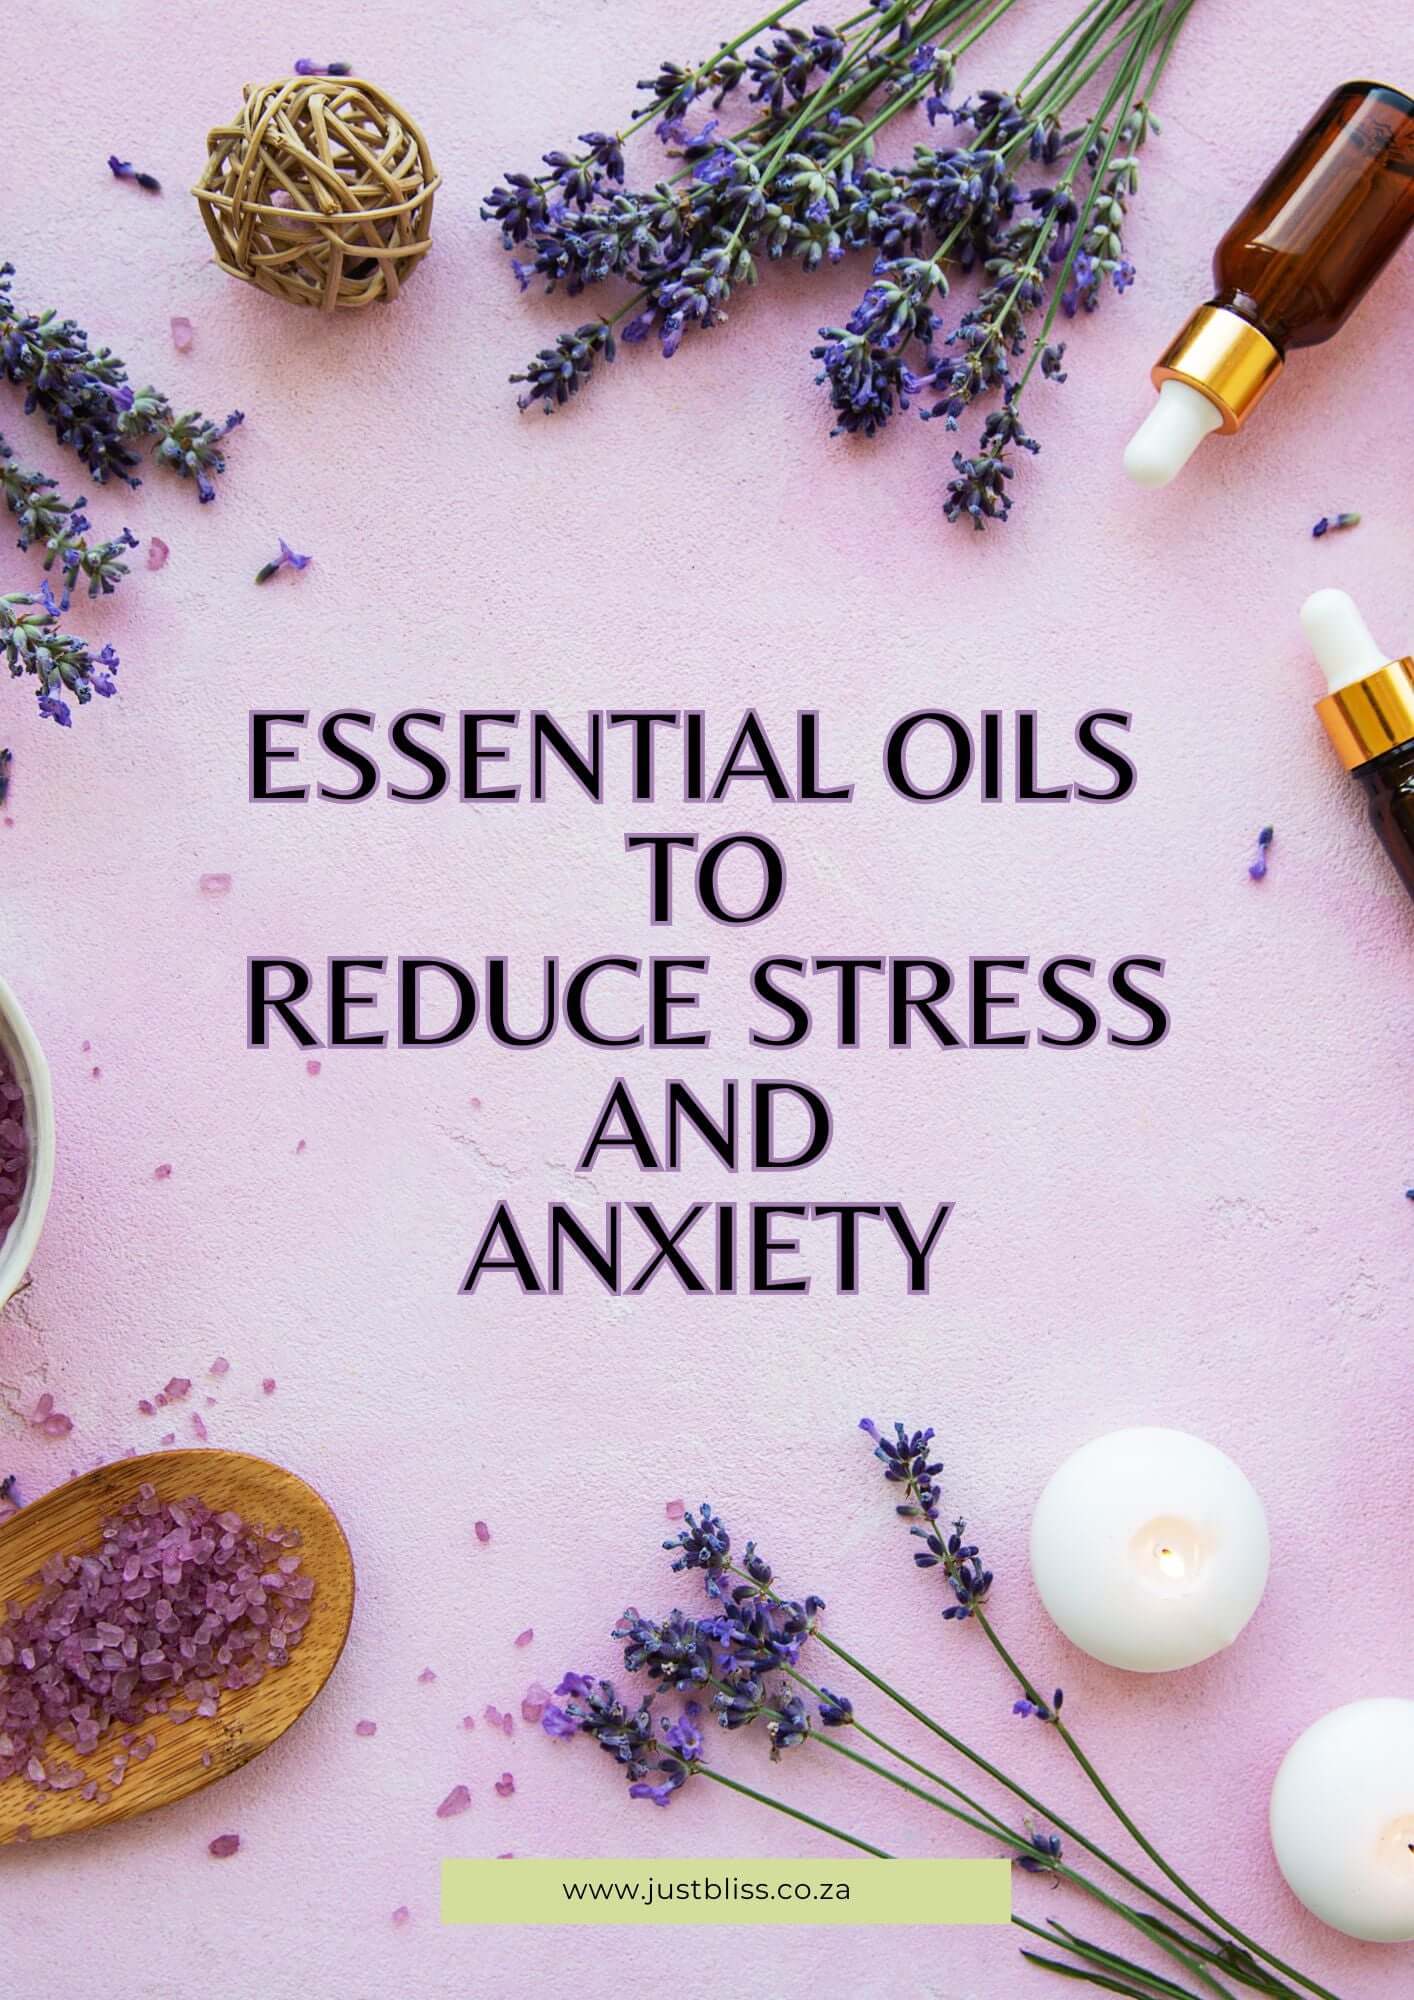 JUSTBLSS: DIGITAL DOWNLOADS: Essential Oils for Stress & Anxiety E-book